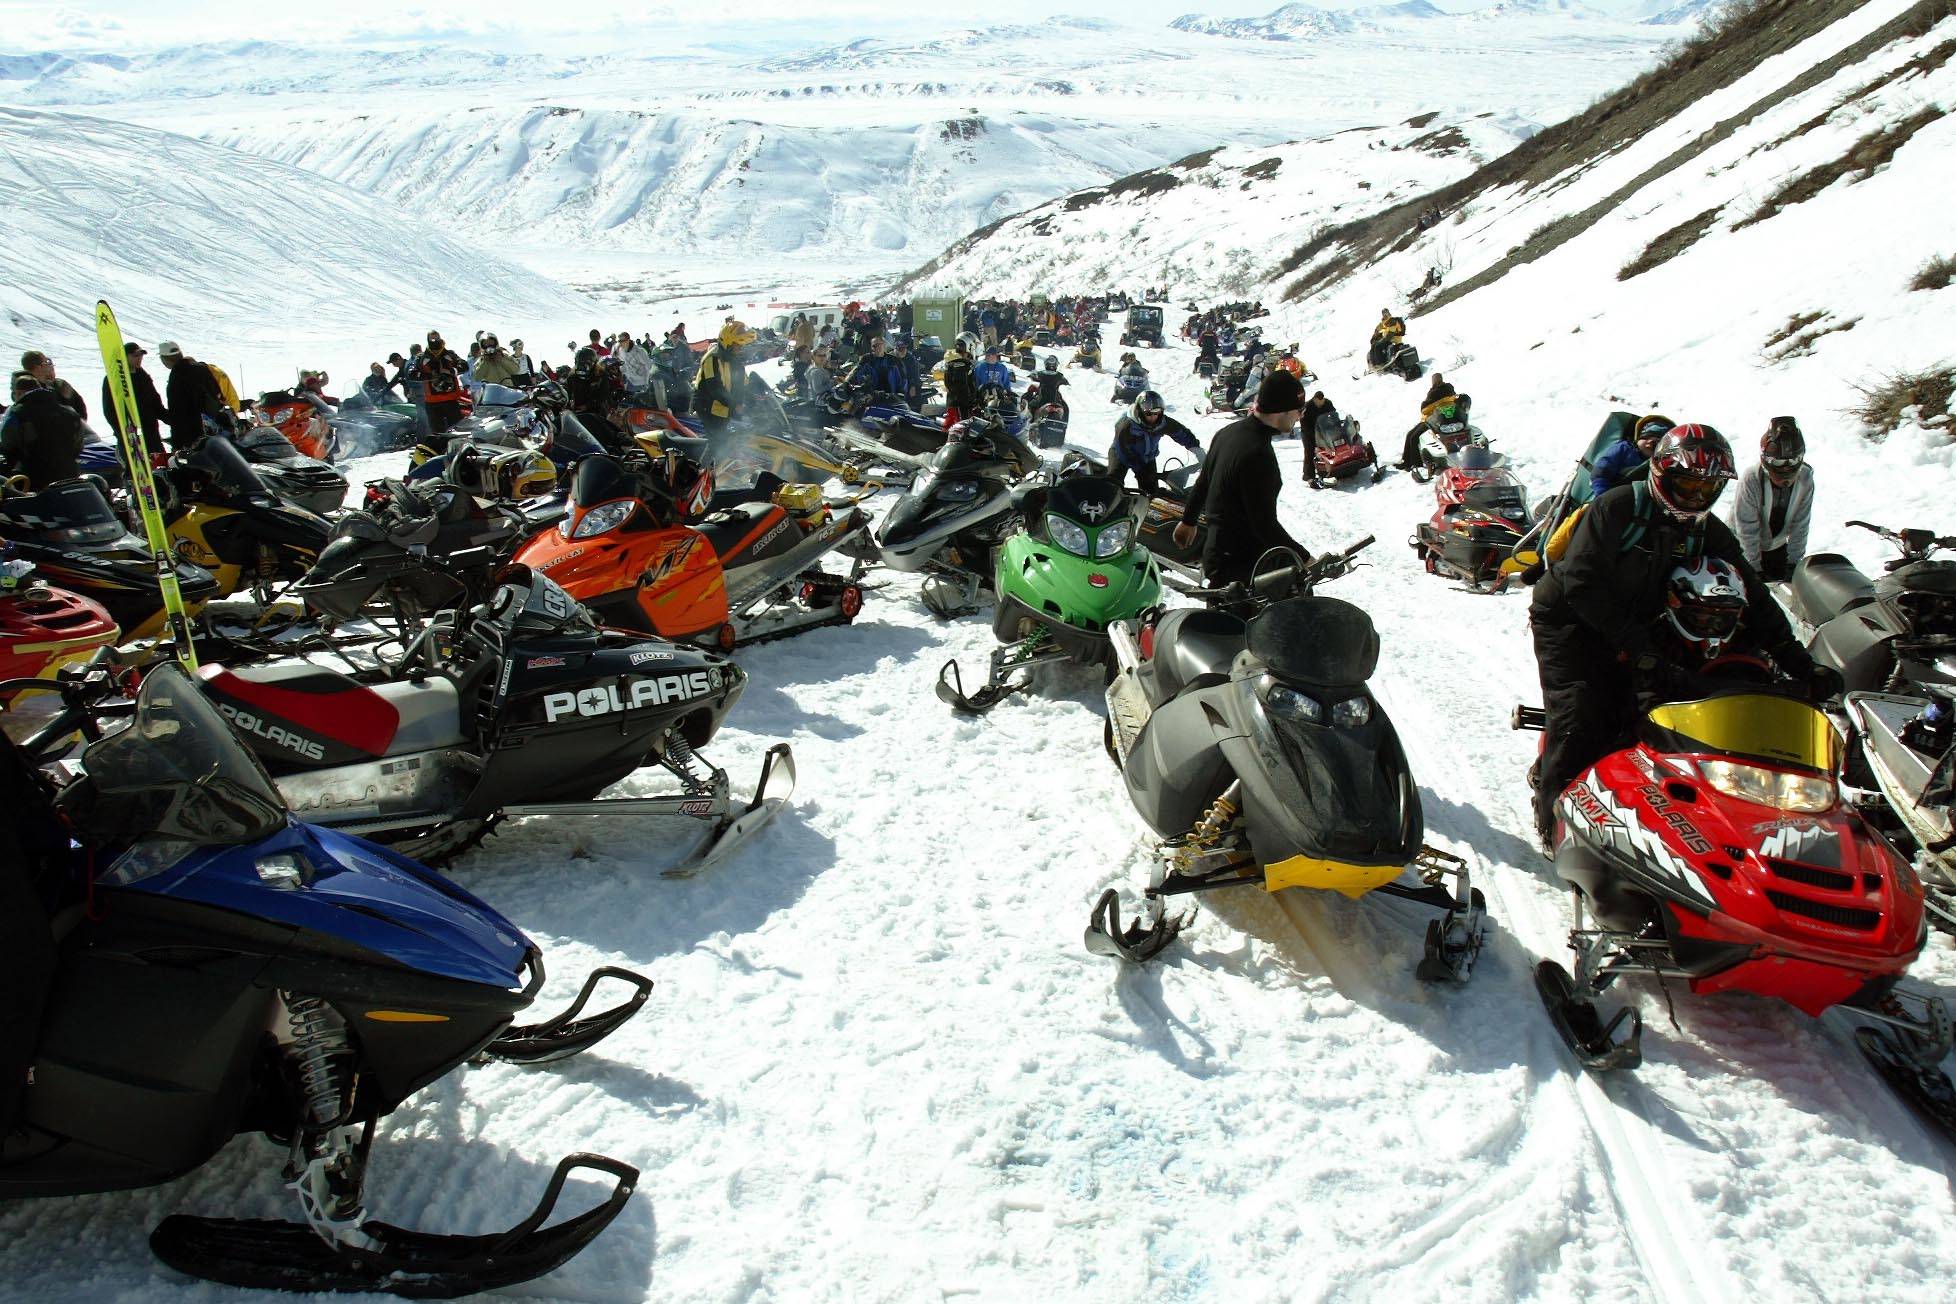 In this April 13, 2007, file photo, snowmachines gather around the finish chute during the 2007 Arctic Man Ski and Sno-Go Classic race in the HooDoo Mountains outside of Summit Lake, Alaska. (Eric Engman/Fairbanks Daily News-Miner via AP